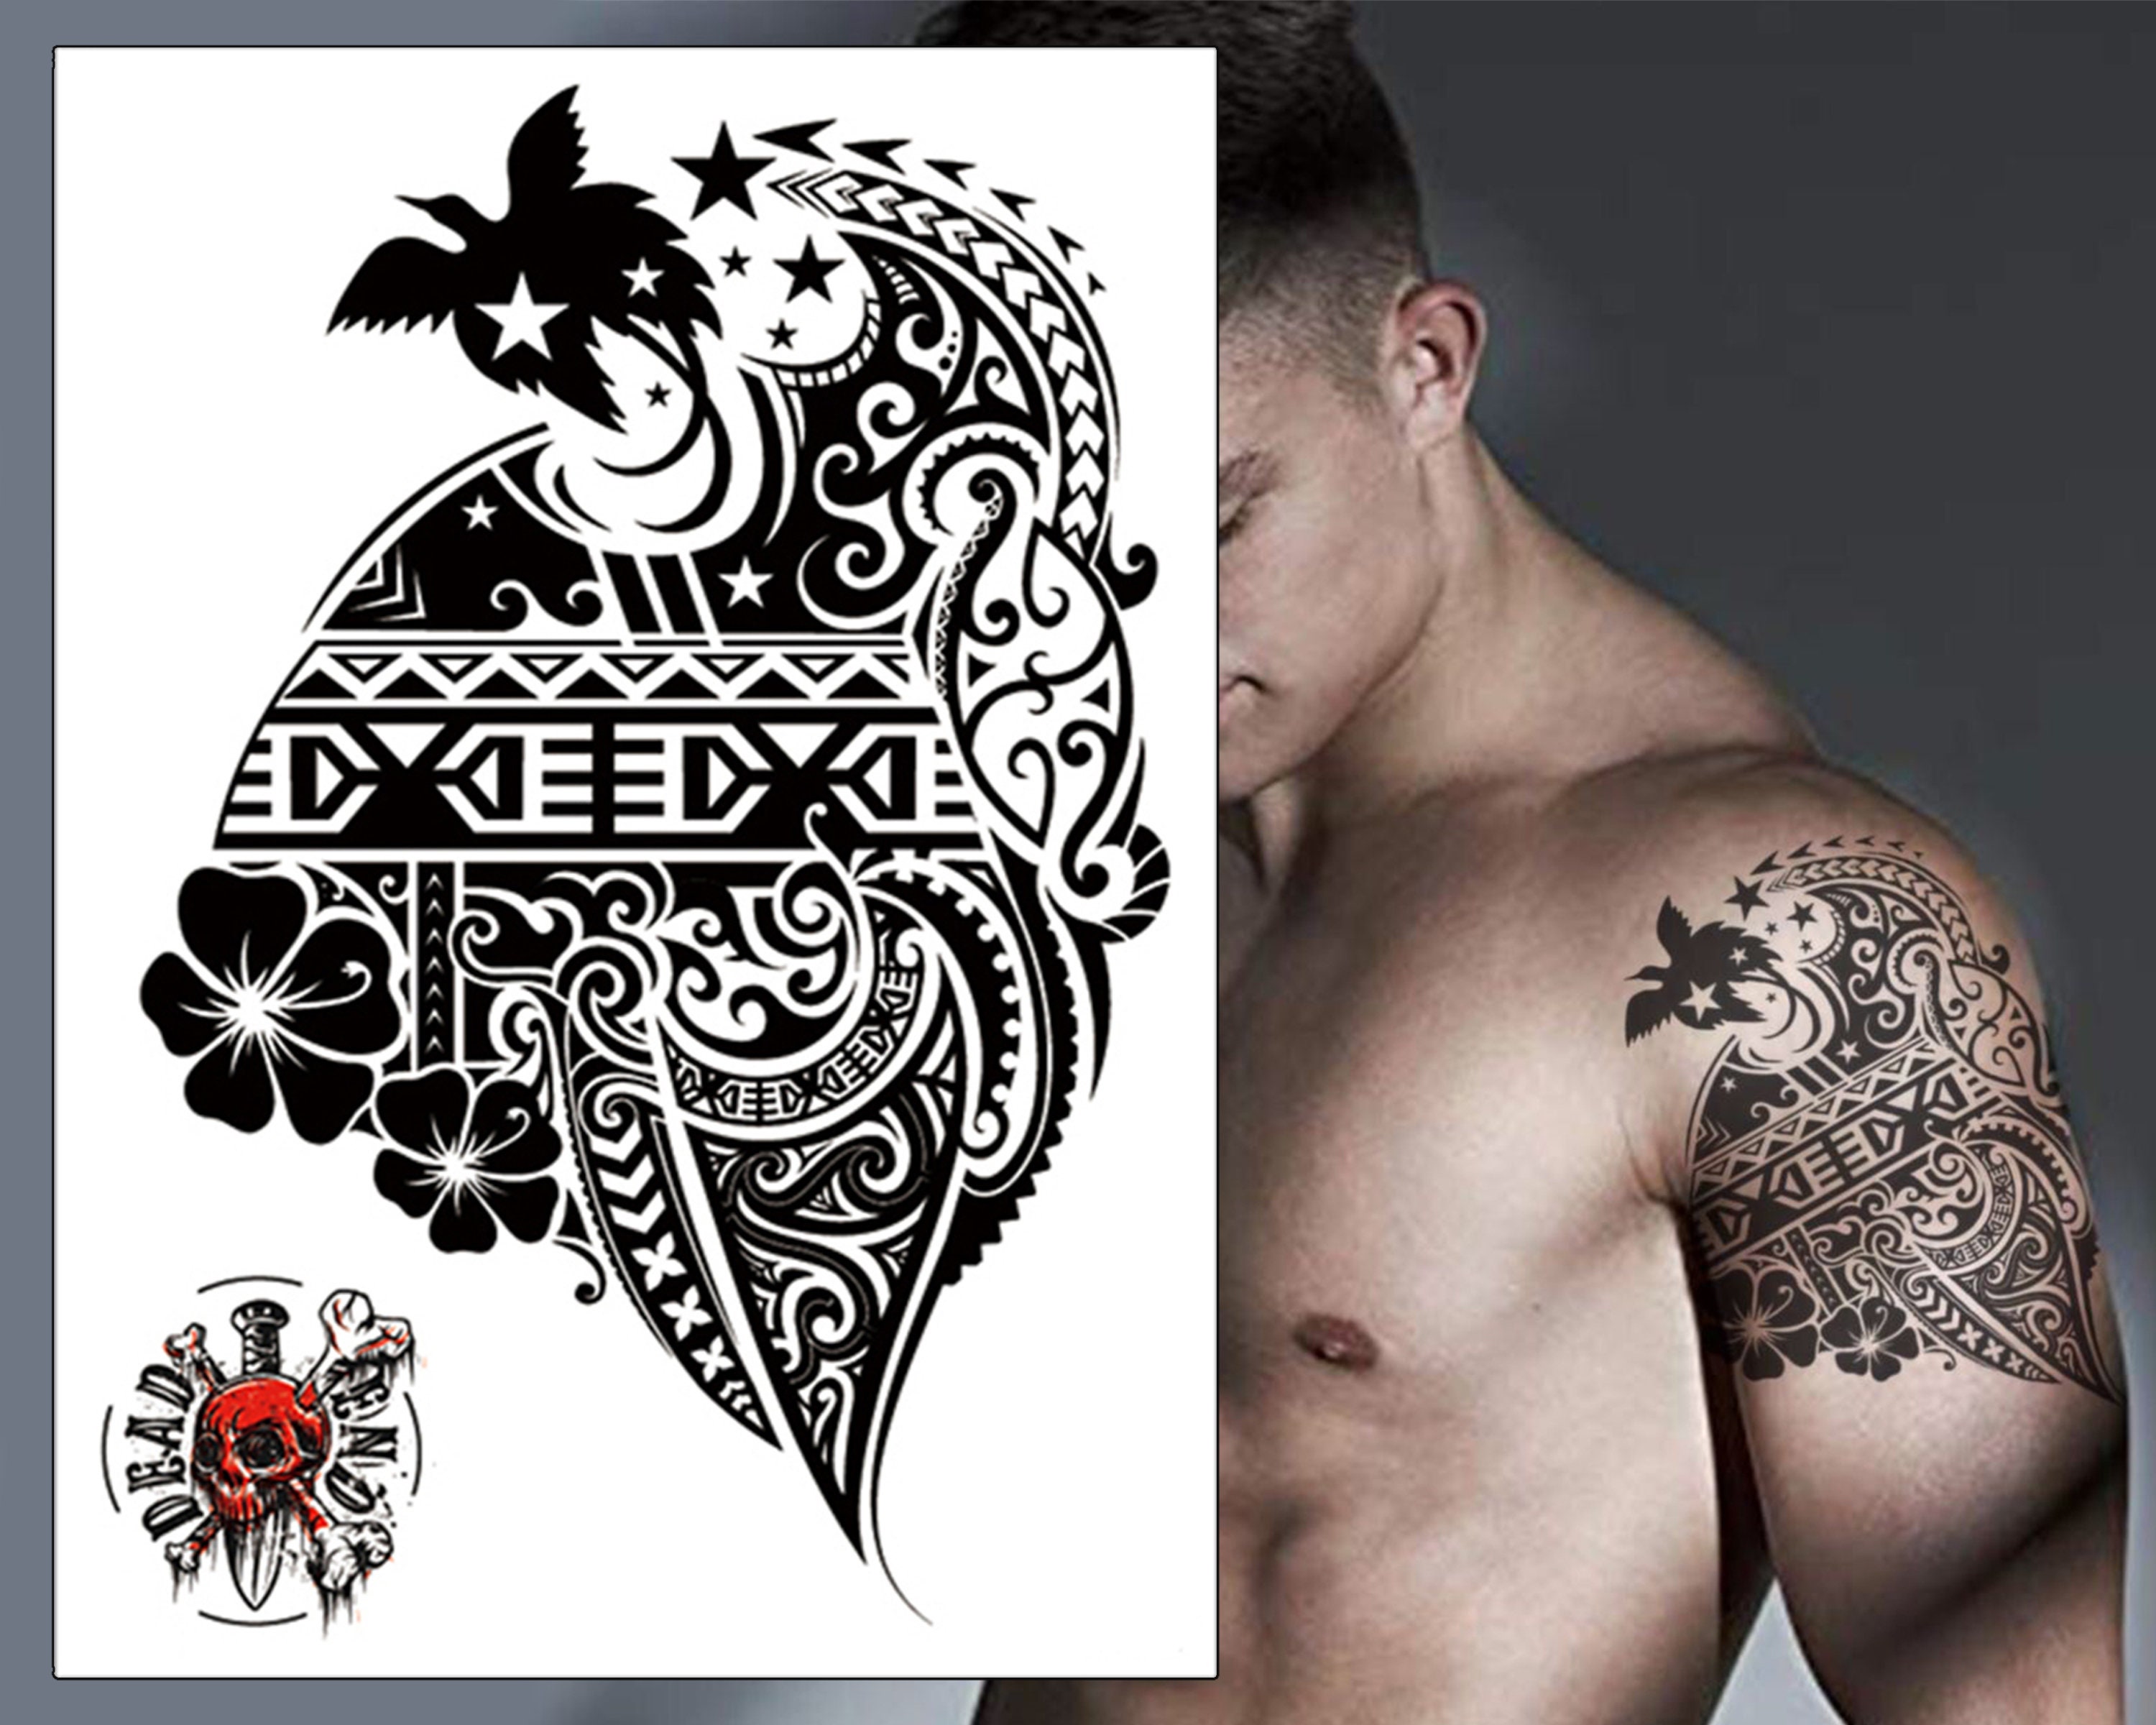 Maori Tribal Style Tattoo Pattern With Scorpio Fit For A Back